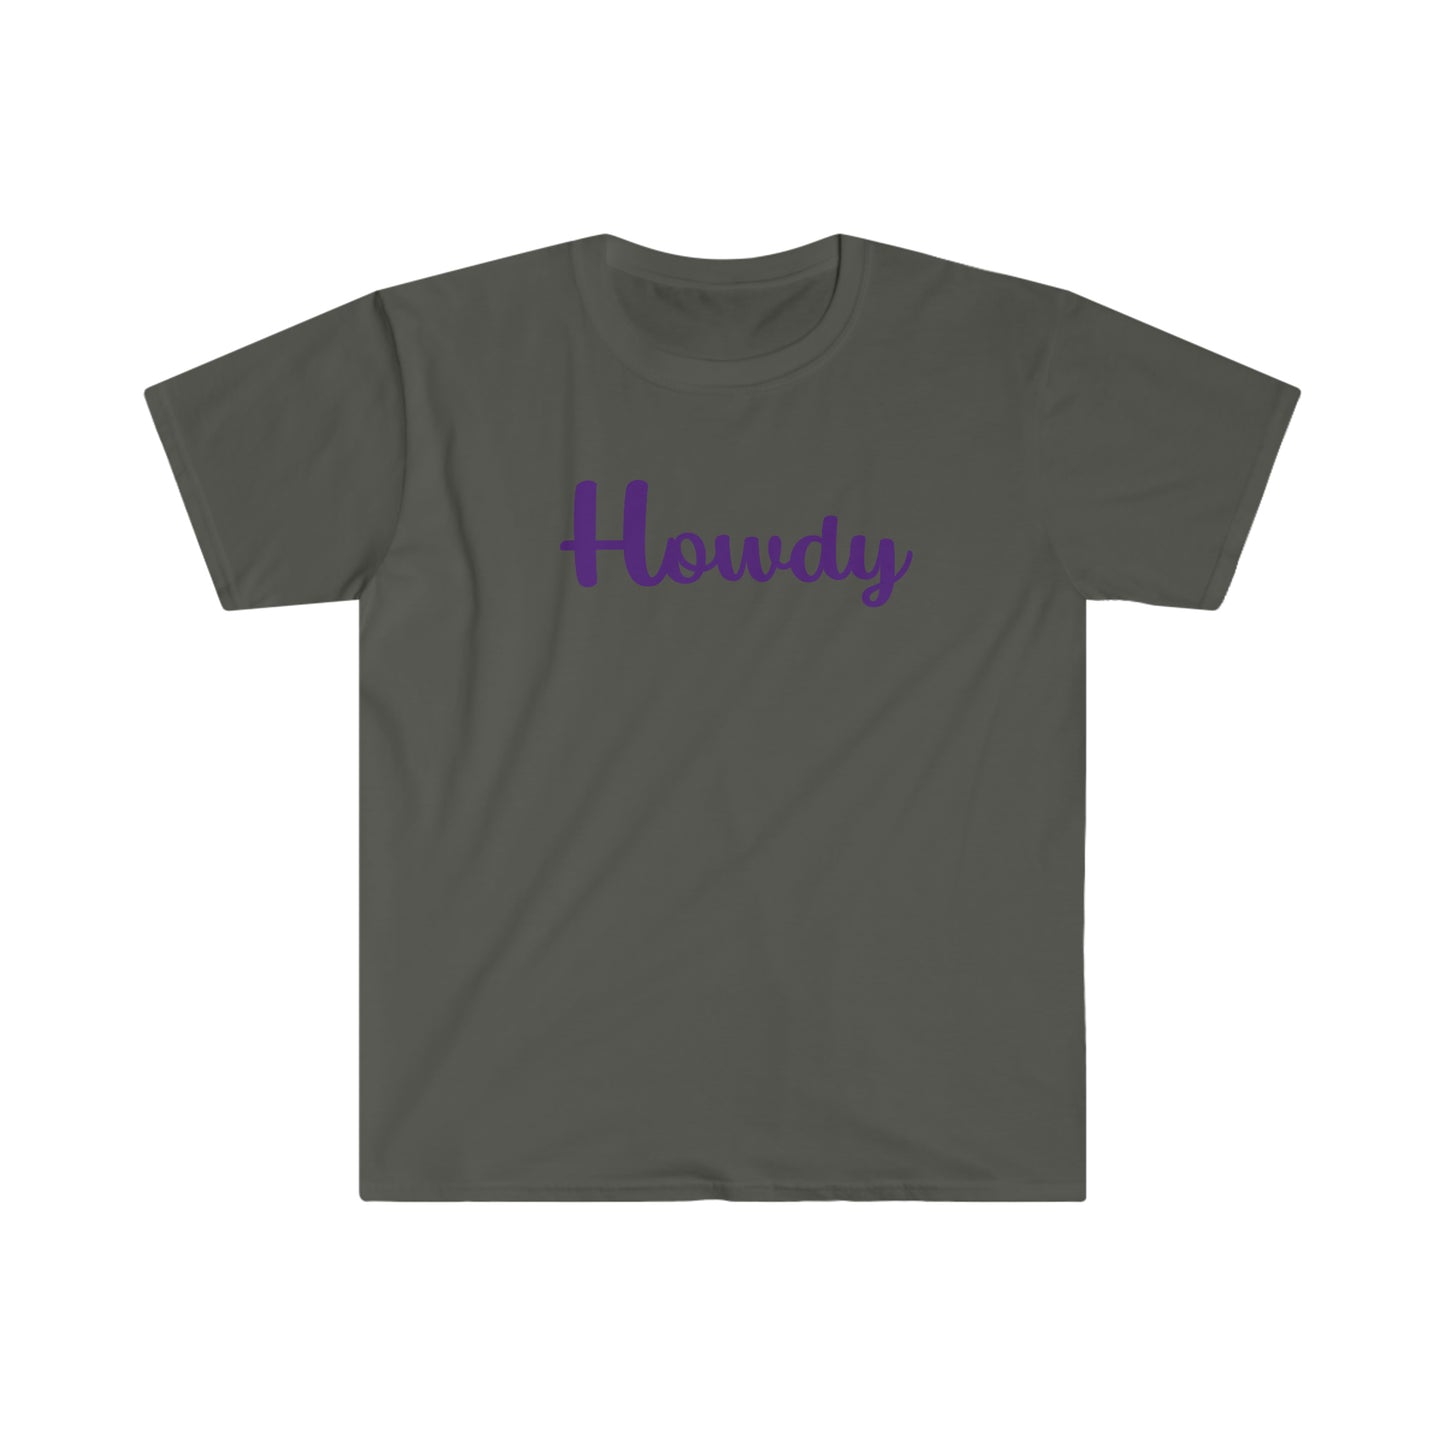 Howdy - Fort Worth T-Shirt